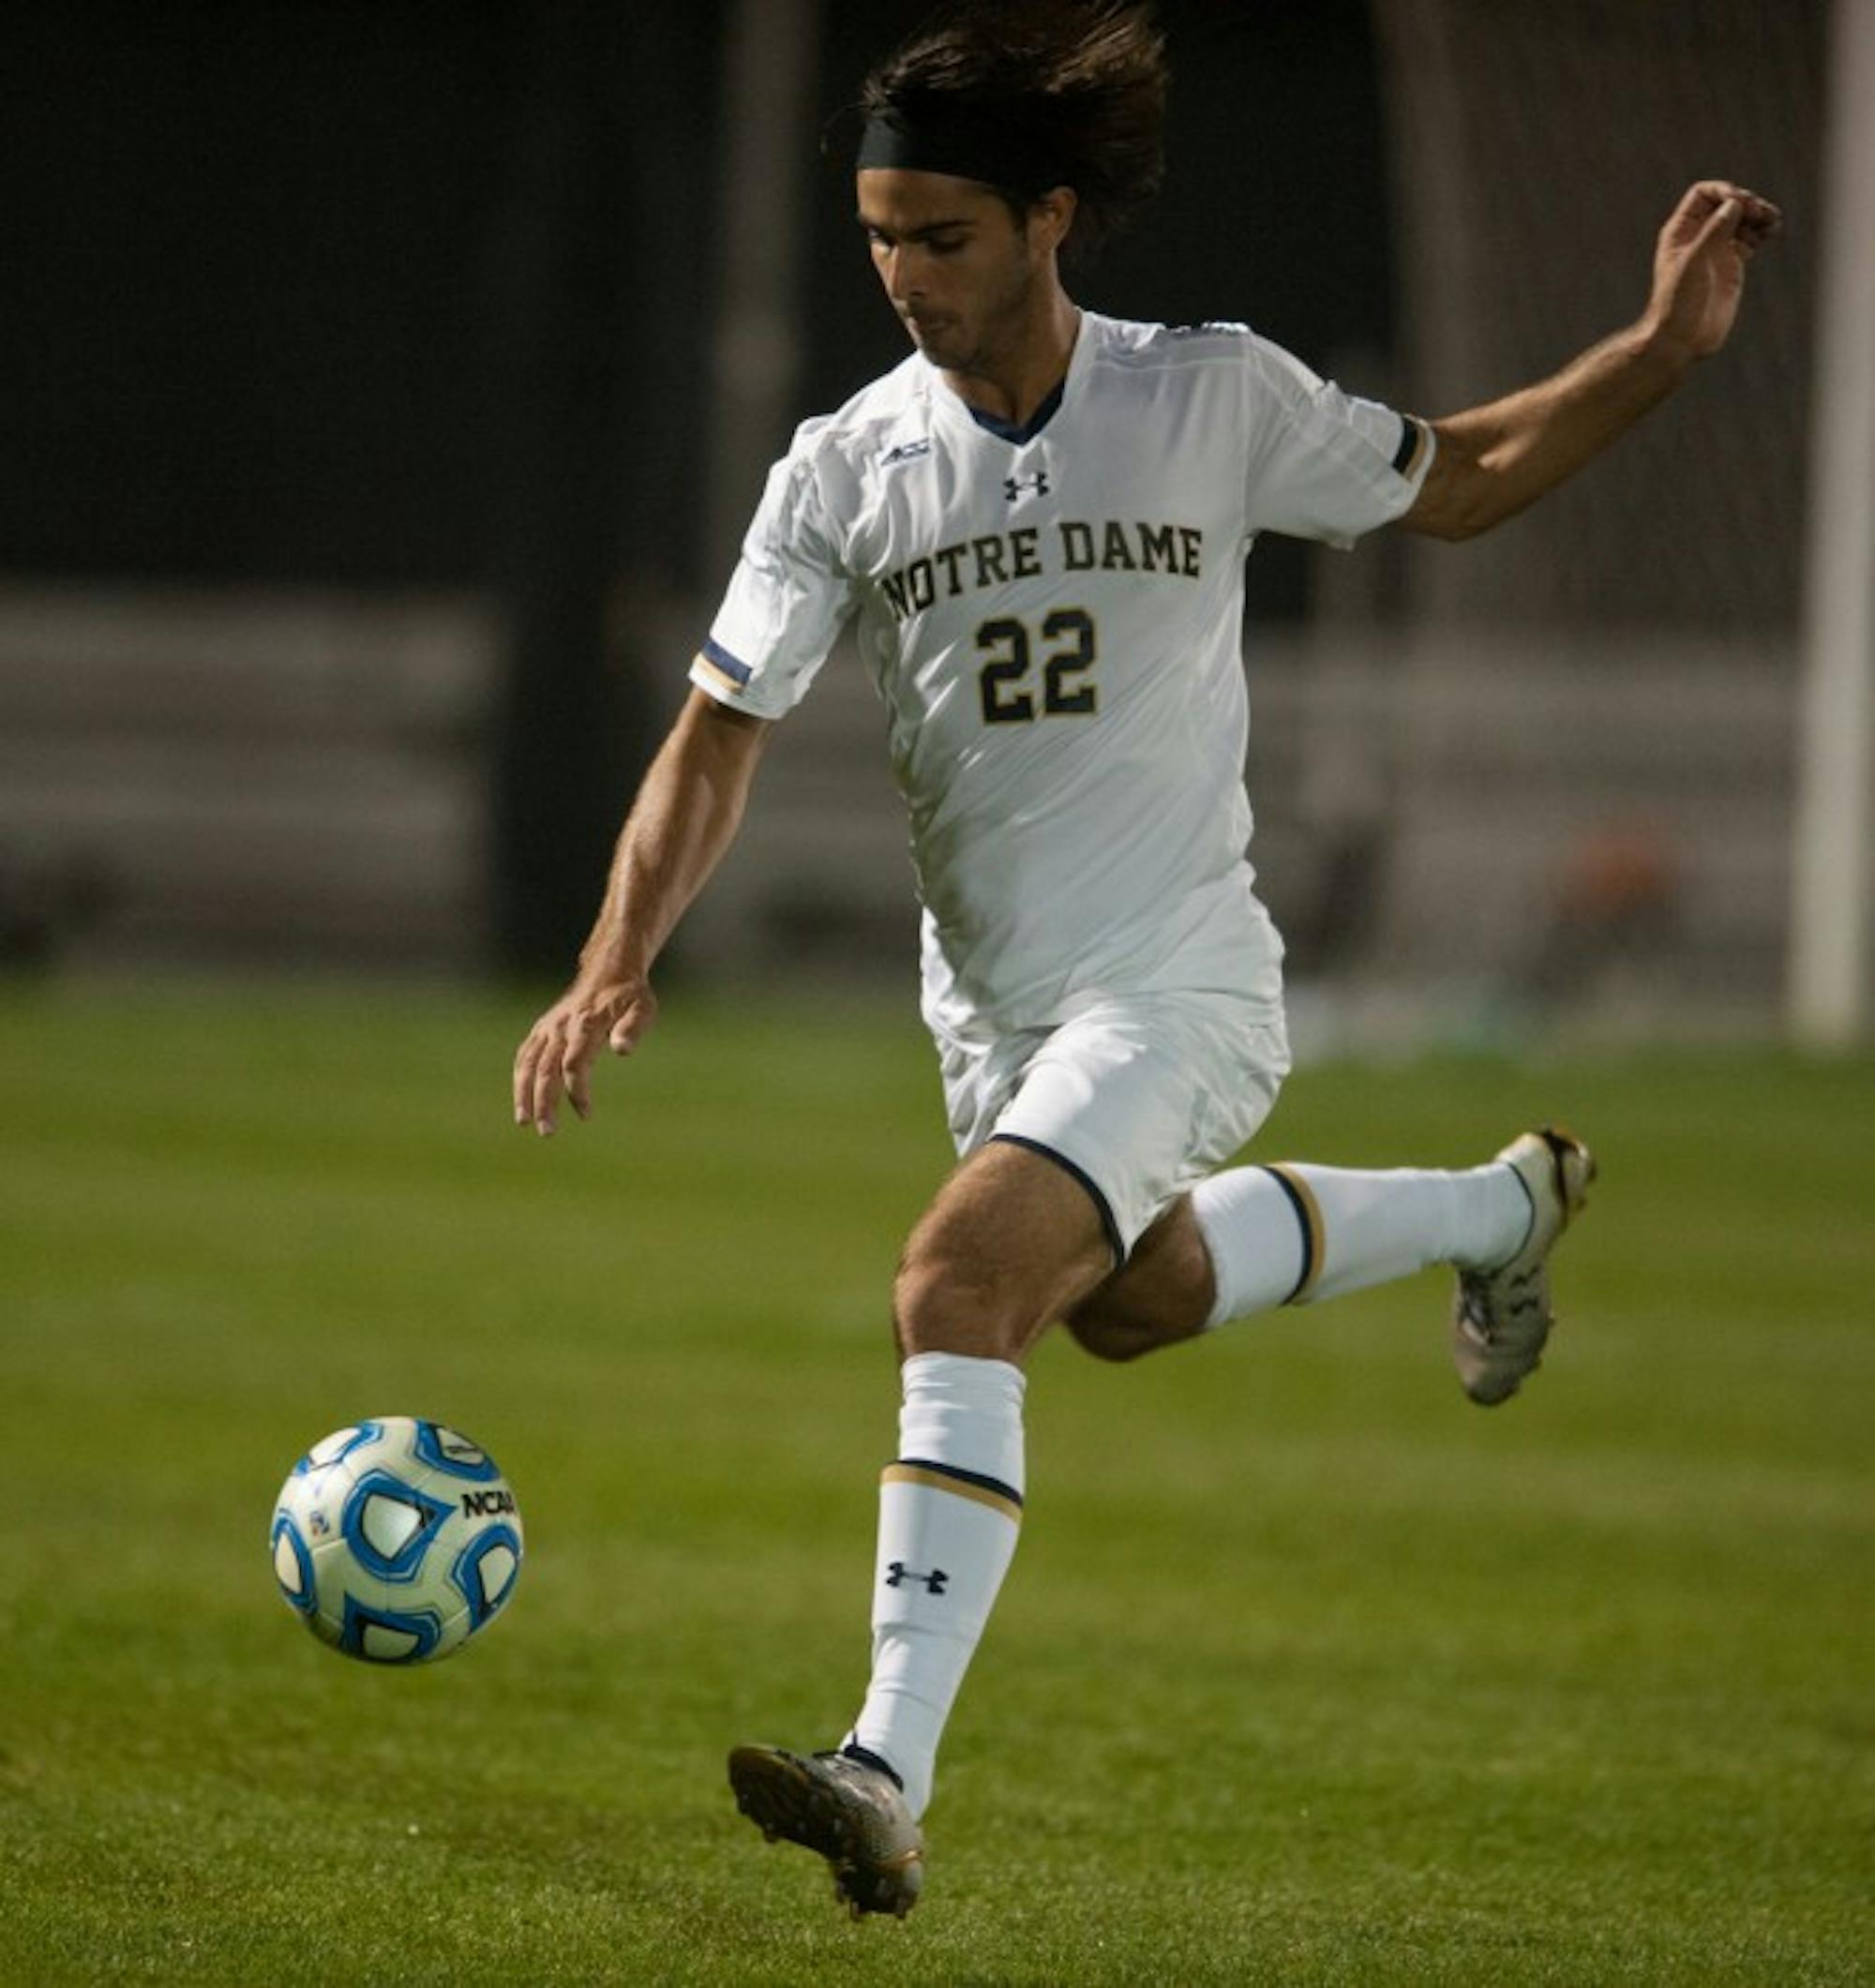 Irish graduate student Vince Cicciarelli prepares to unleash a shot during Notre Dame’s 1-0 double- overtime win over VCU on Tuesday. Cicciarelli had two shots on the night.